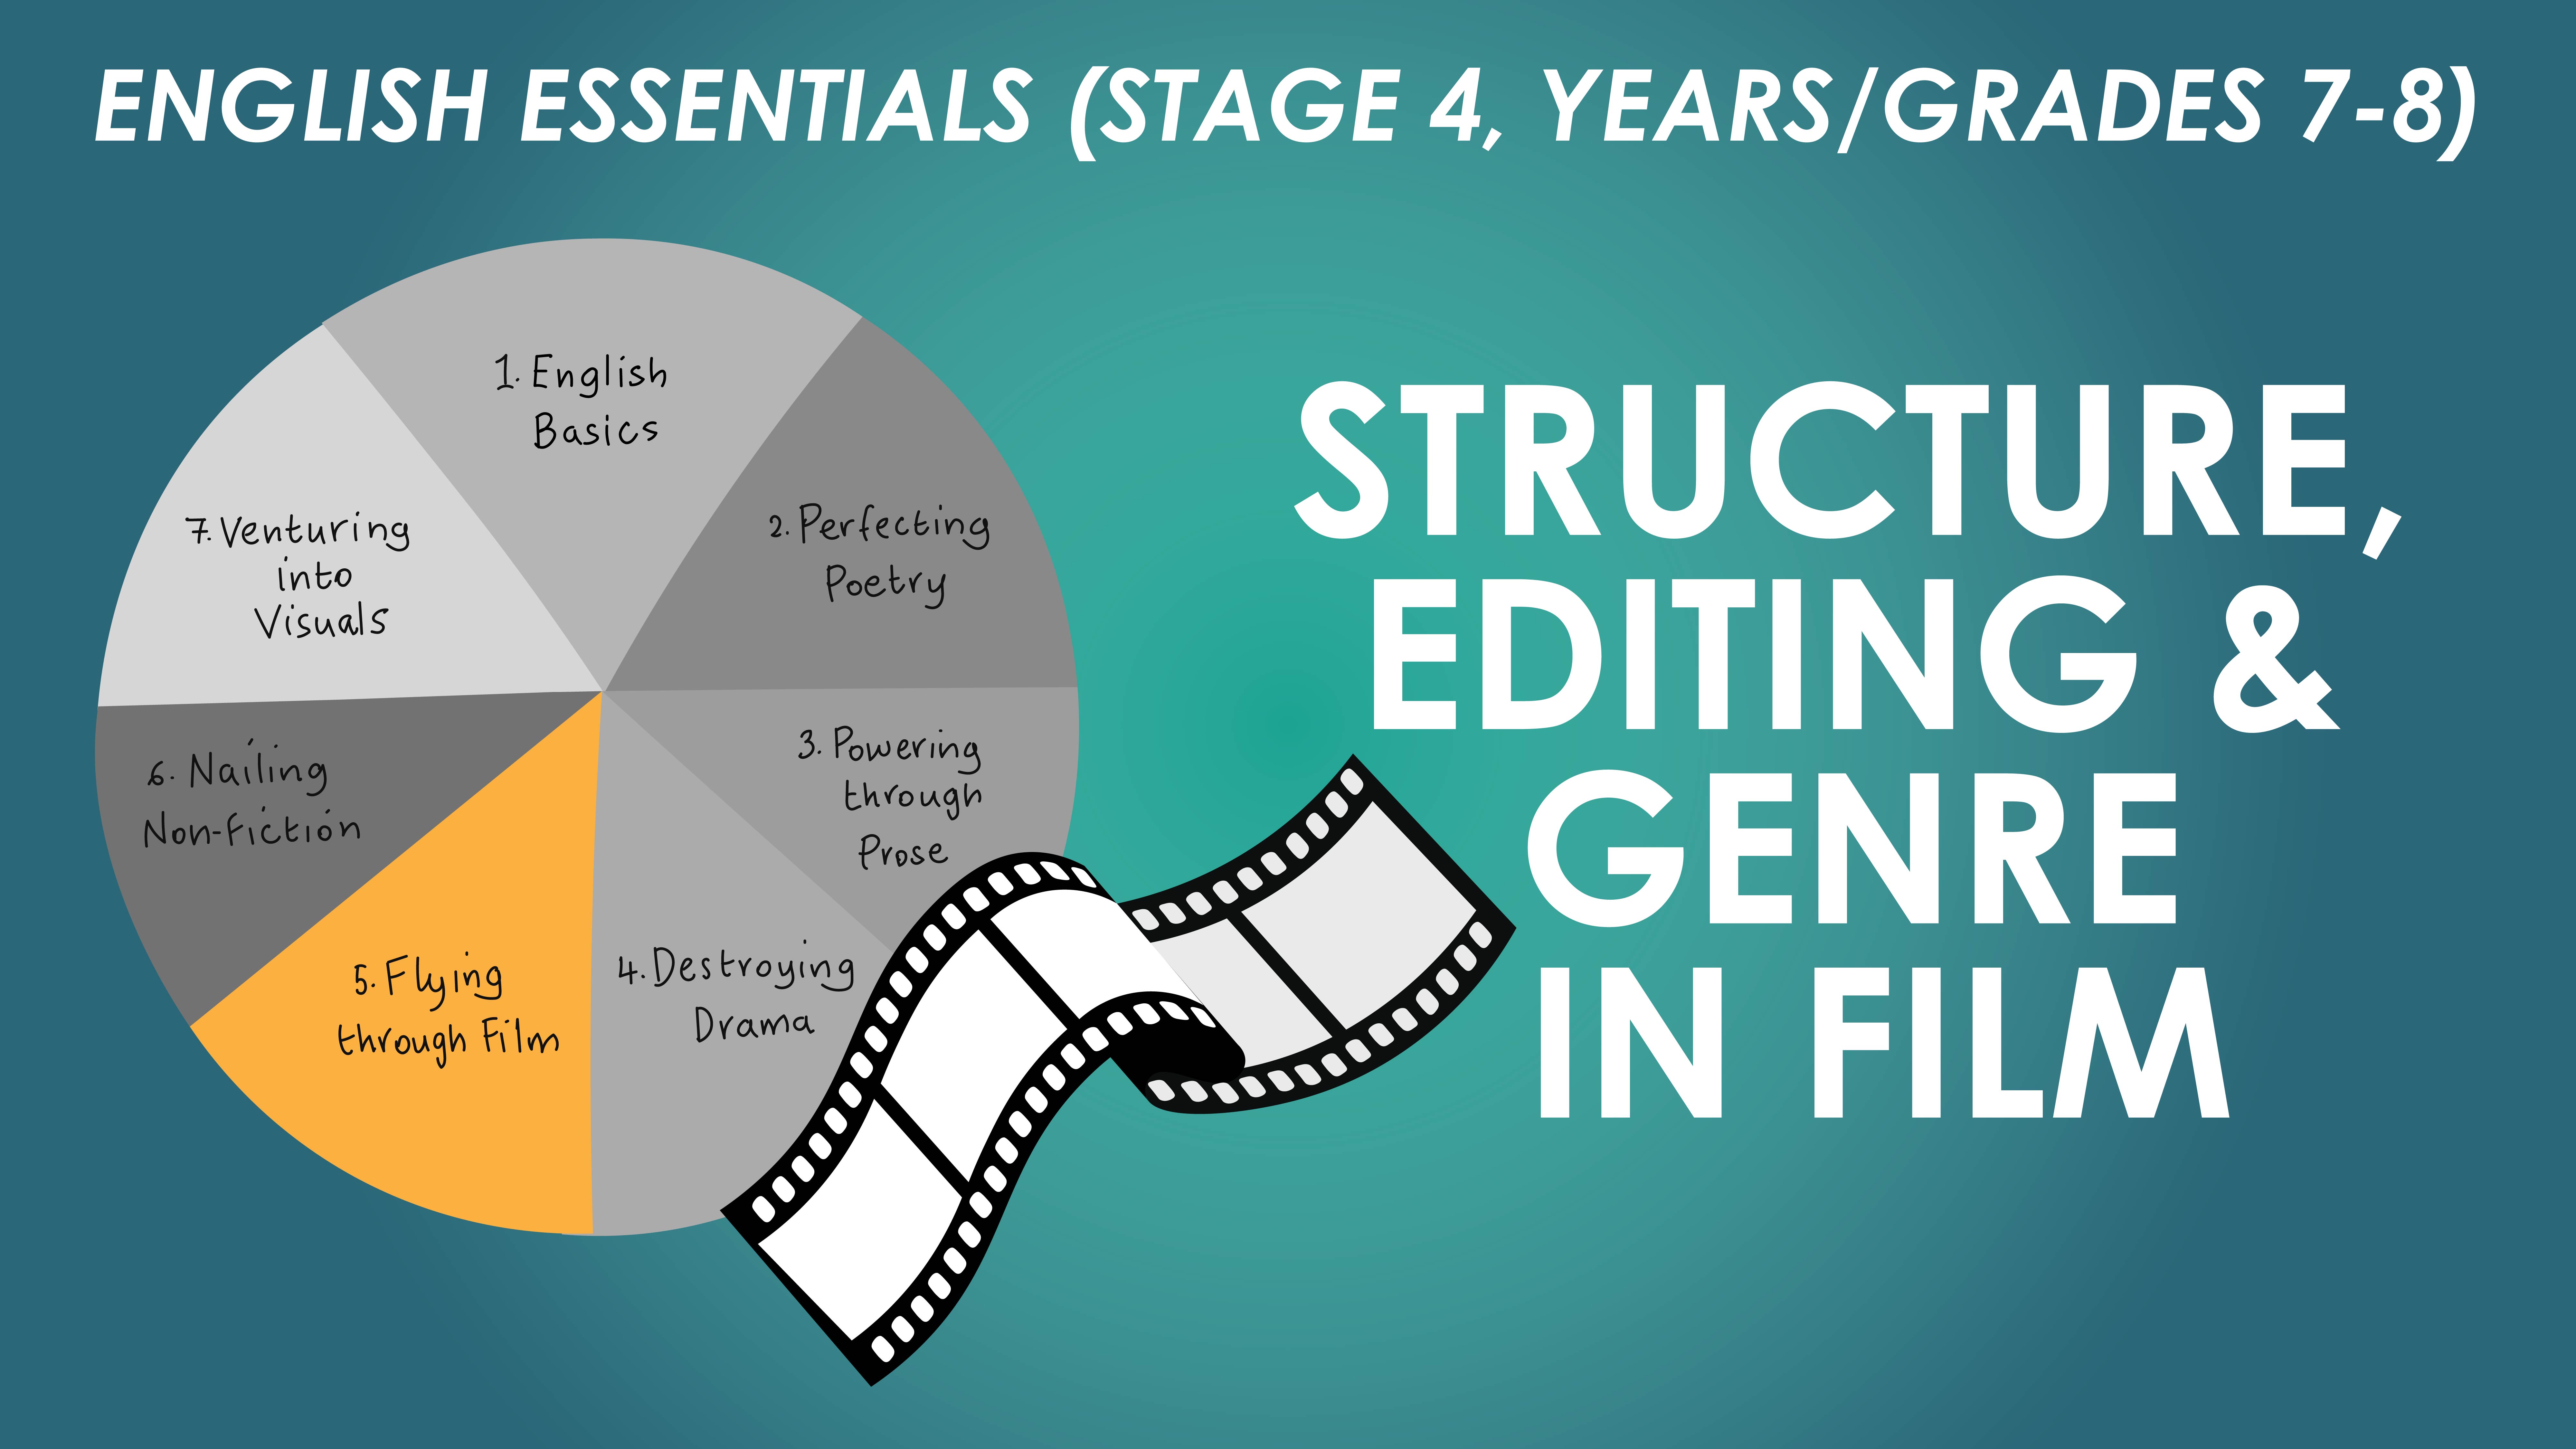 English Essentials - Flying Through Film - Structure, Editing and Genre in Film (Stage 4, Years/Grades 7-8)